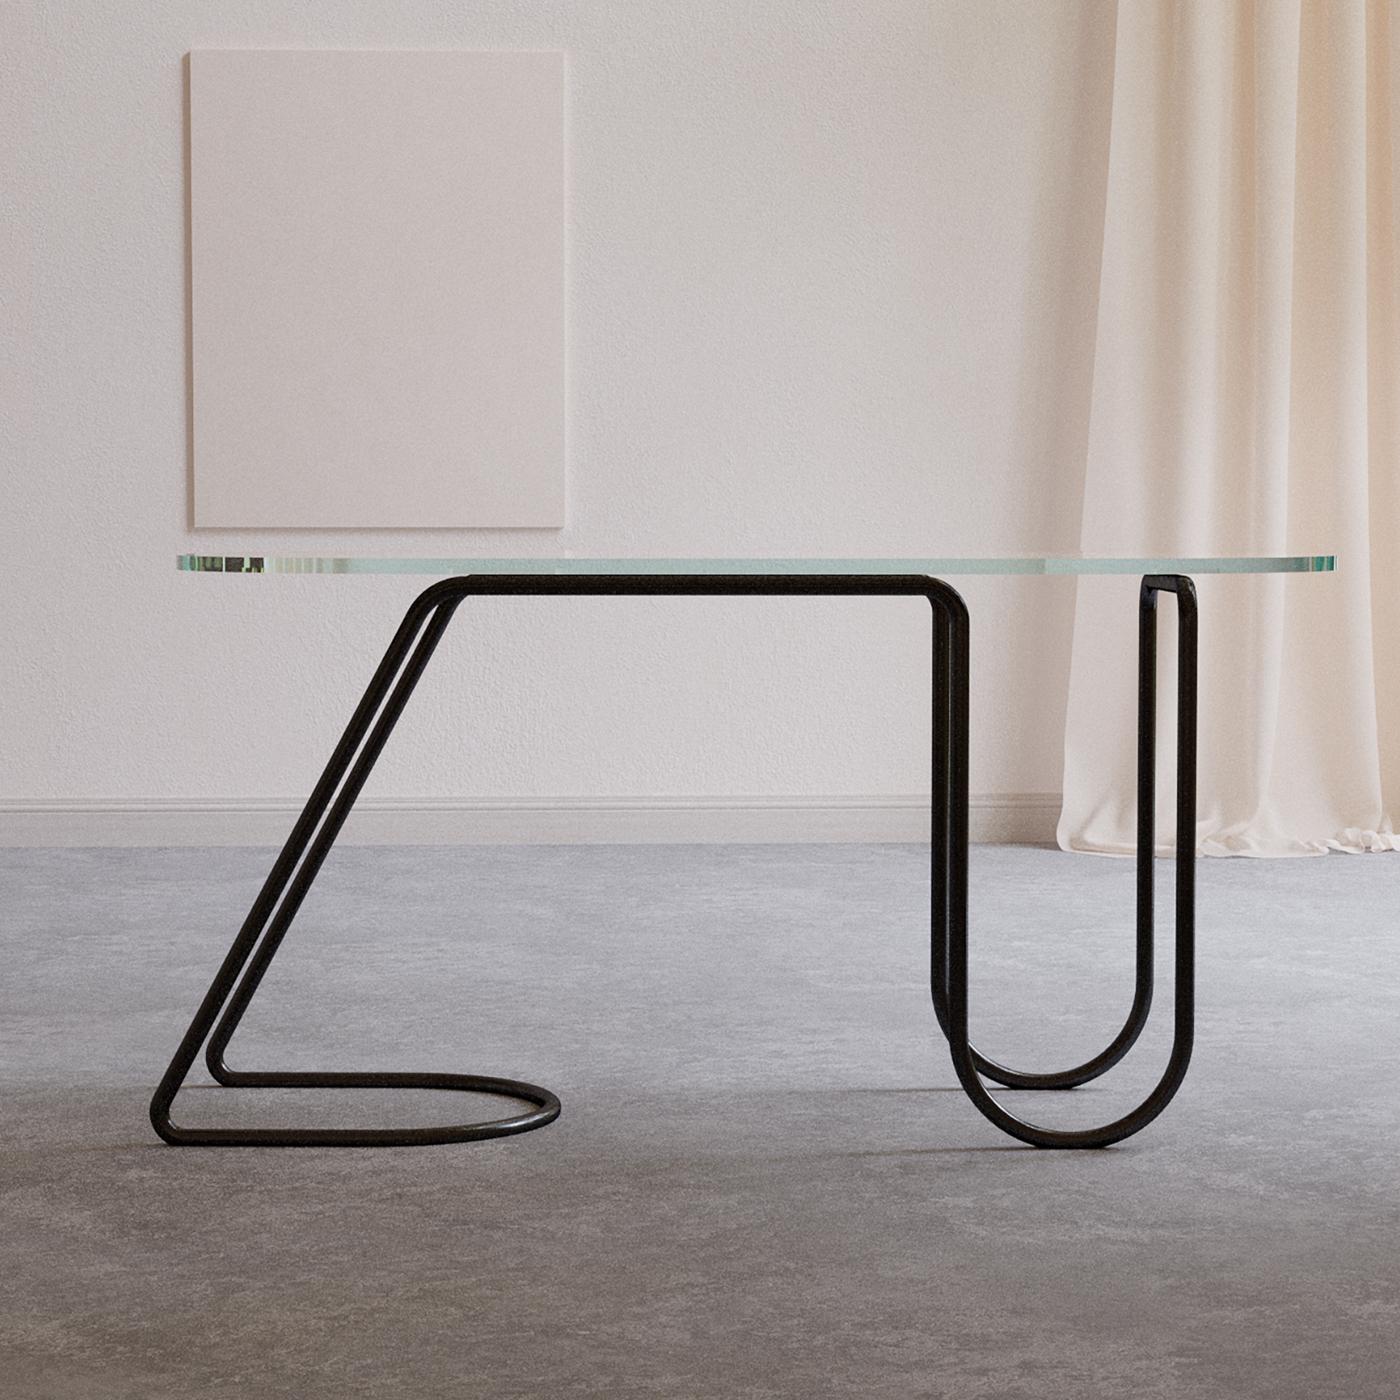 Part of the U-Disk Collection, this desk reflects the playful personality of its designer Federico Pepe. A continuous steel tube, bent up to achieve an efficient and fluid support base, sustains the extra-clear glass top marked by rounded sides.